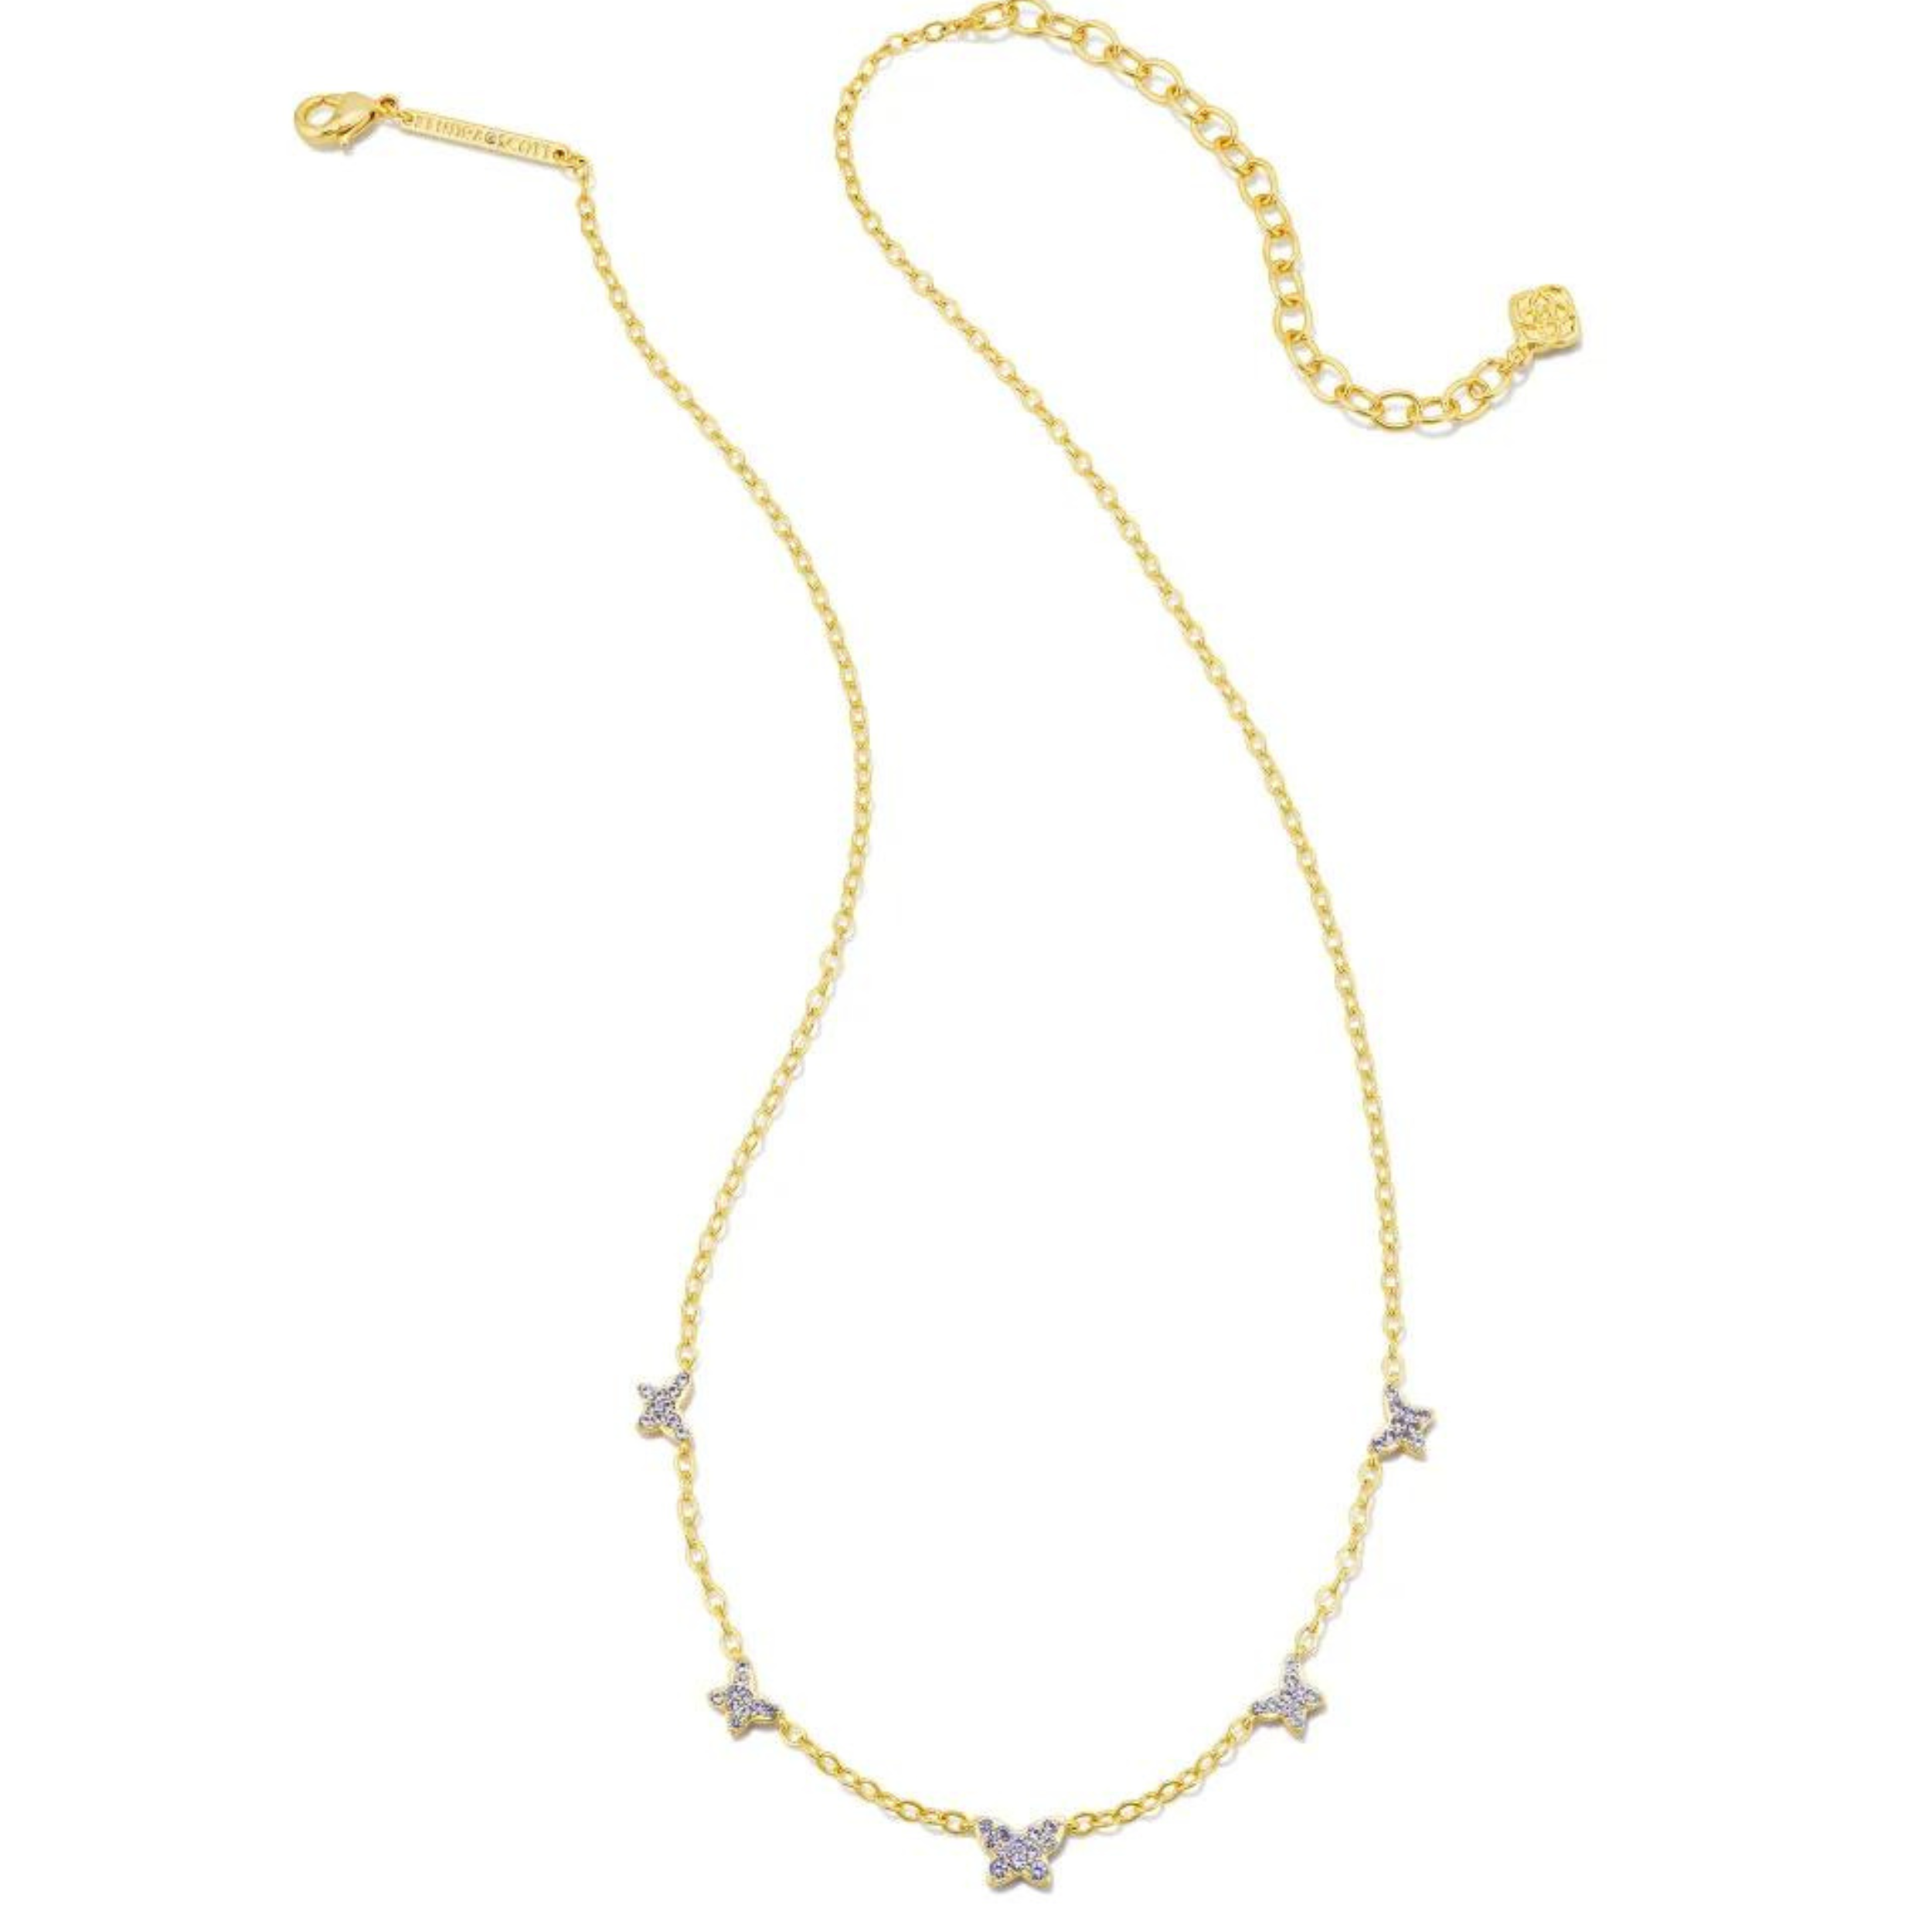 Gold necklace with 5 violet crystal butterflies, pictured on a white background.